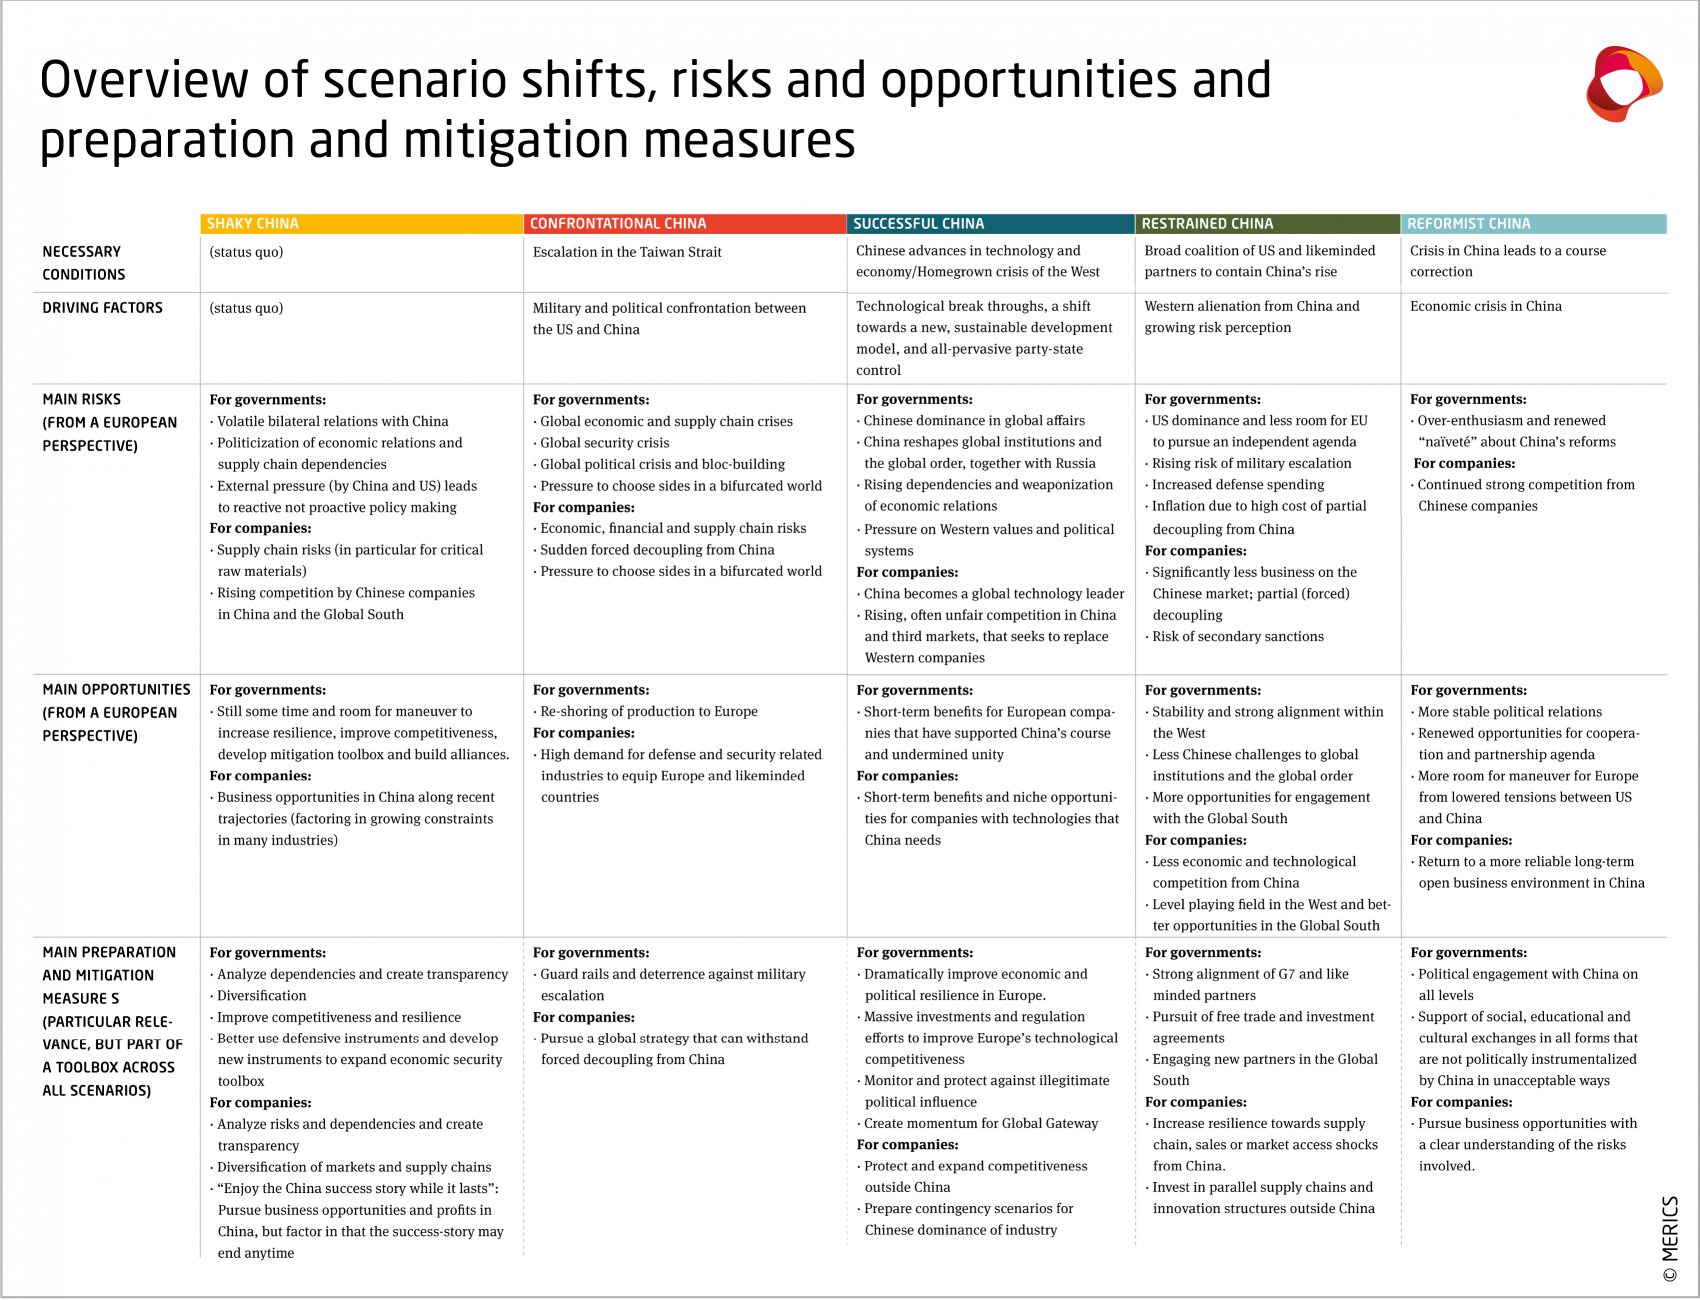 Table 1: Overview of scenario shifts, risks and opportunitities